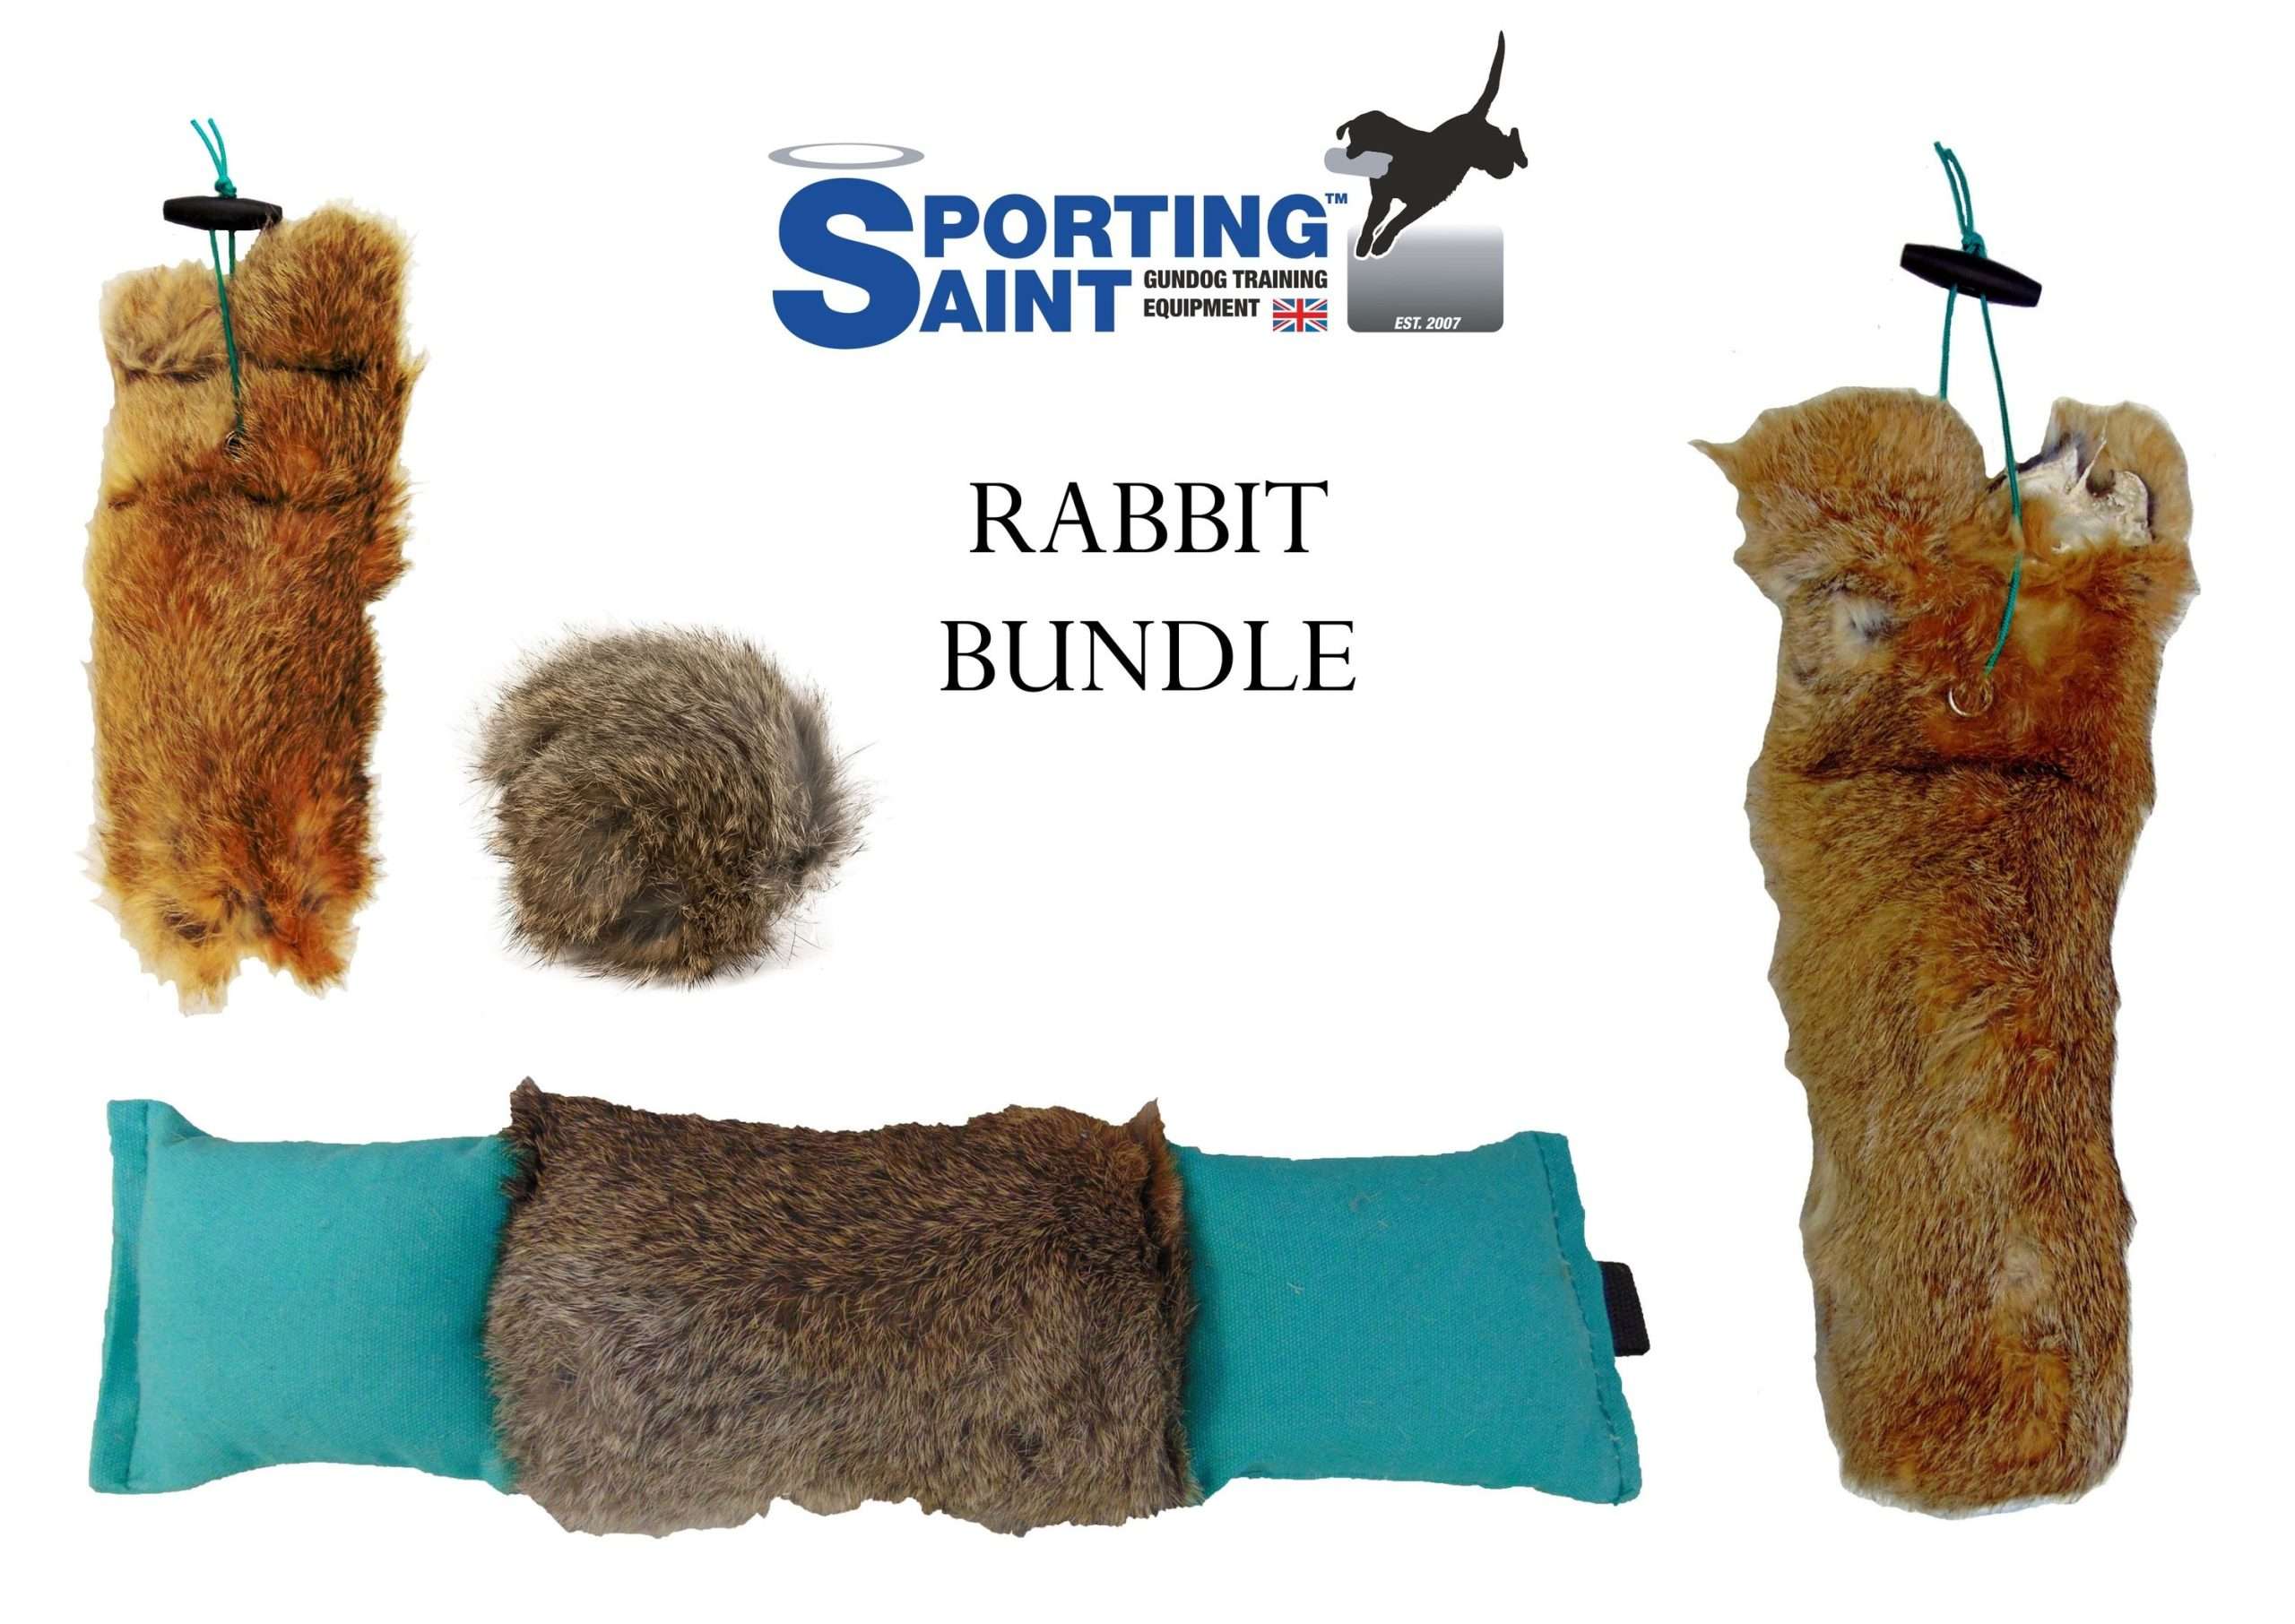 rabbit bundle orig scaled <strong>NEW!</strong> The Sporting Saint Rabbit Bundle...you are now ready for rabbit training! The Bundle Consists of - <ul> <li>Rabbit Ball</li> <li>1/2lb Rabbit Dummy</li> <li>1lb Rabbit Dummy</li> <li>3 Piece Rabbit</li> <li>Catalogue</li> </ul>